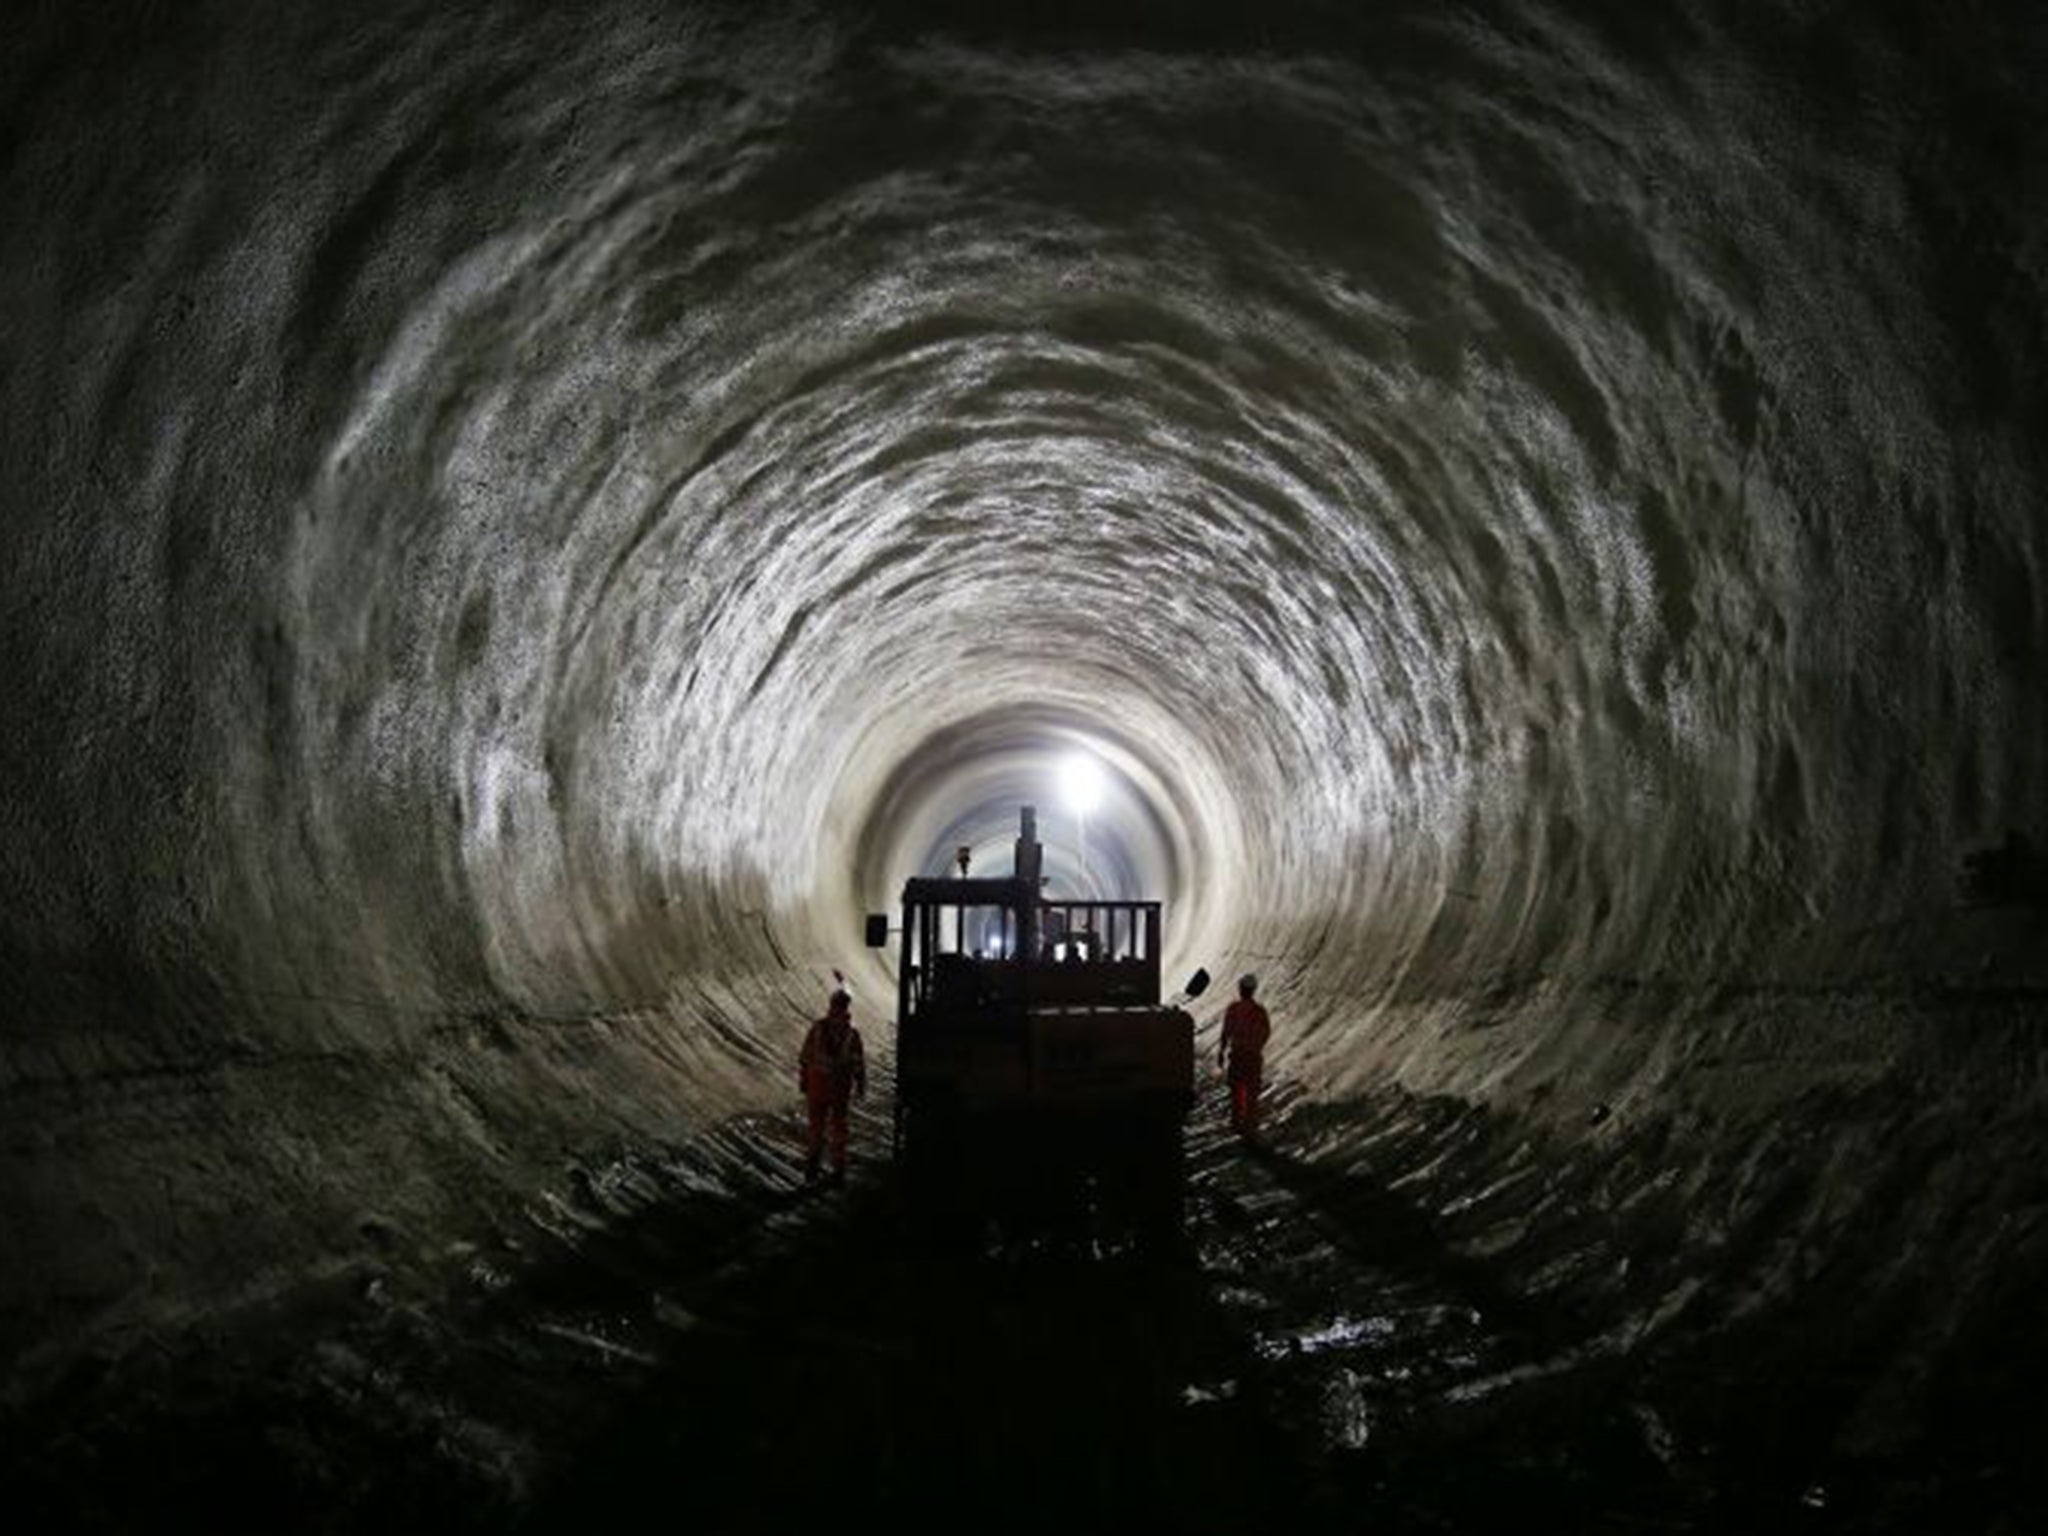 Part of the Crossrail tunnel railway project in London, one of the country's biggest ongoing infrastructure projects